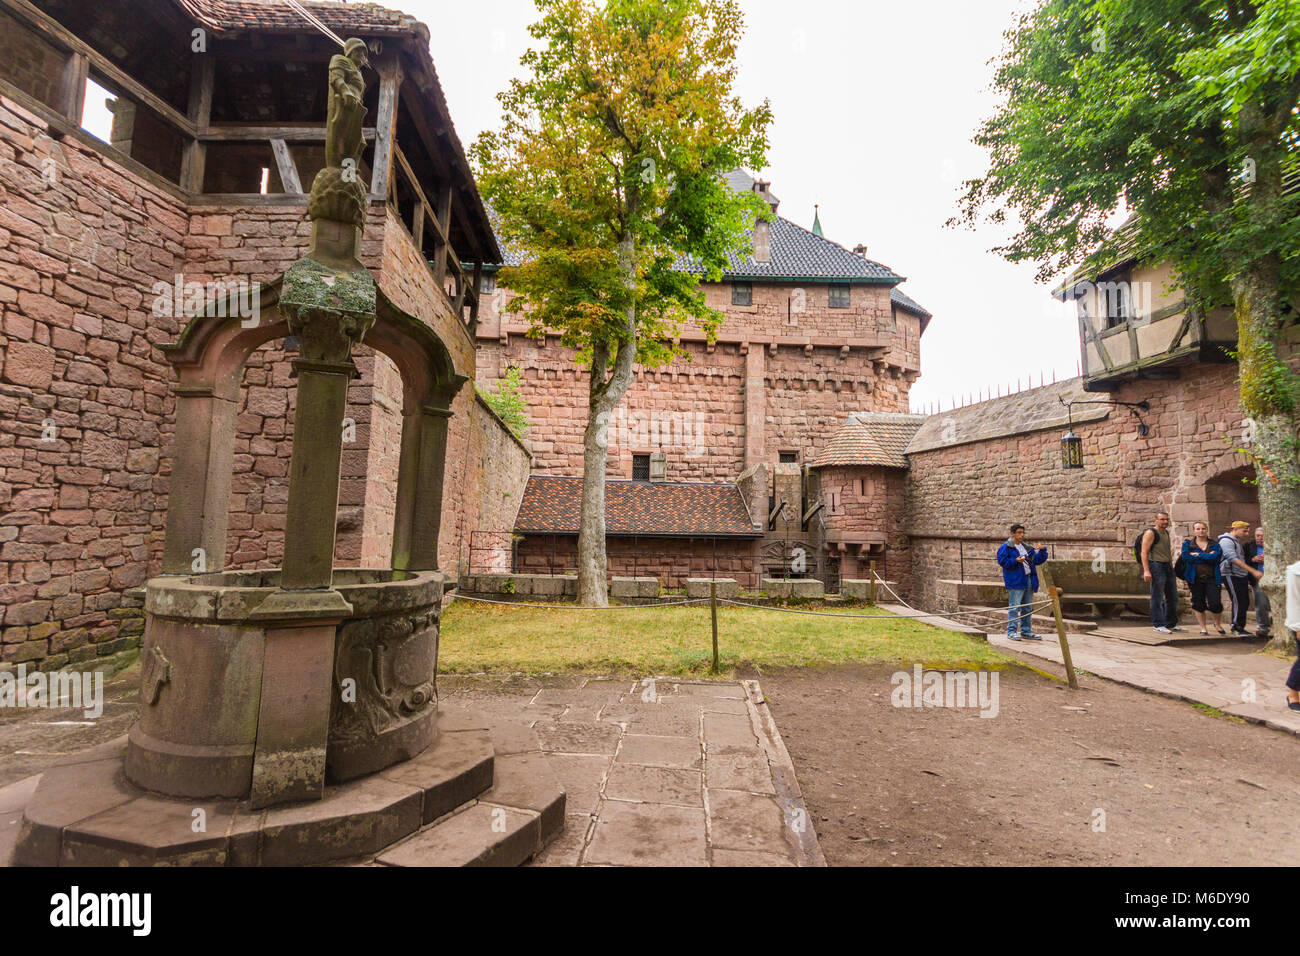 Well and inner courtyard of the Château du Haut-Konigsbourg, a medieval castle located Orschwiller, Bas-Rhin, Alsace, France, in the Vosges mountains  Stock Photo